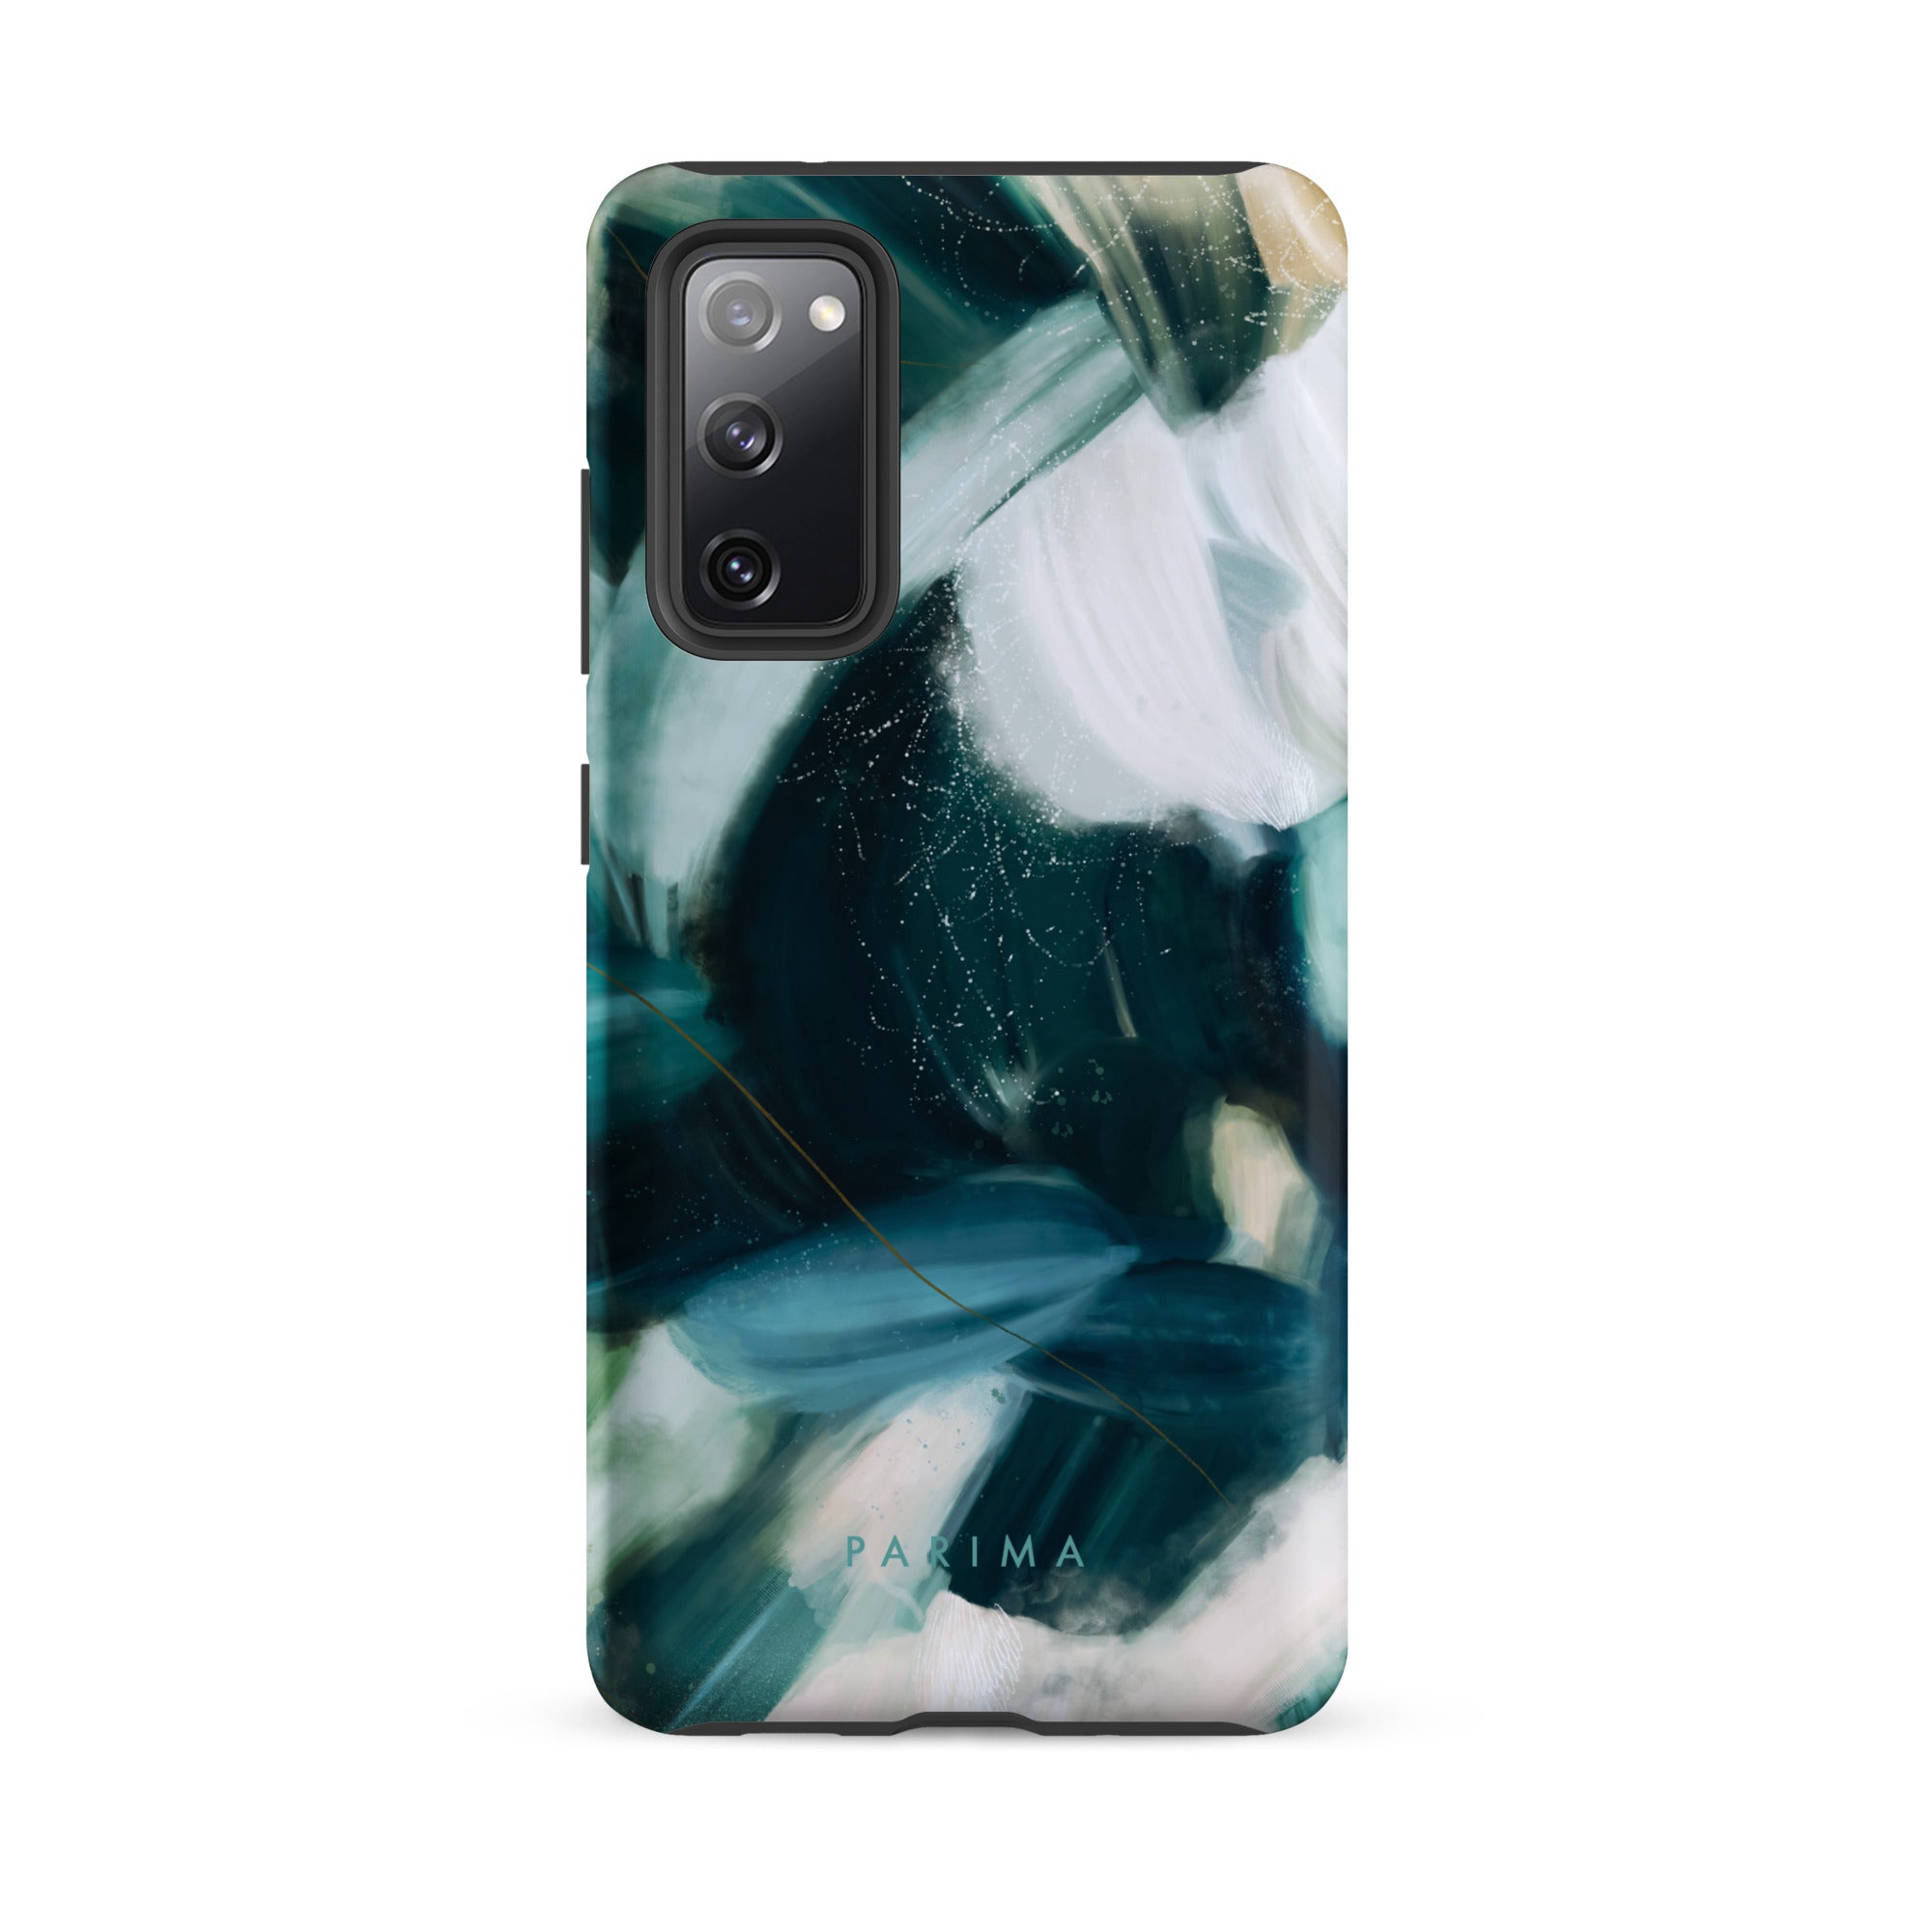 Caspian, blue and teal abstract art on Samsung Galaxy S20 FE tough case by Parima Studio